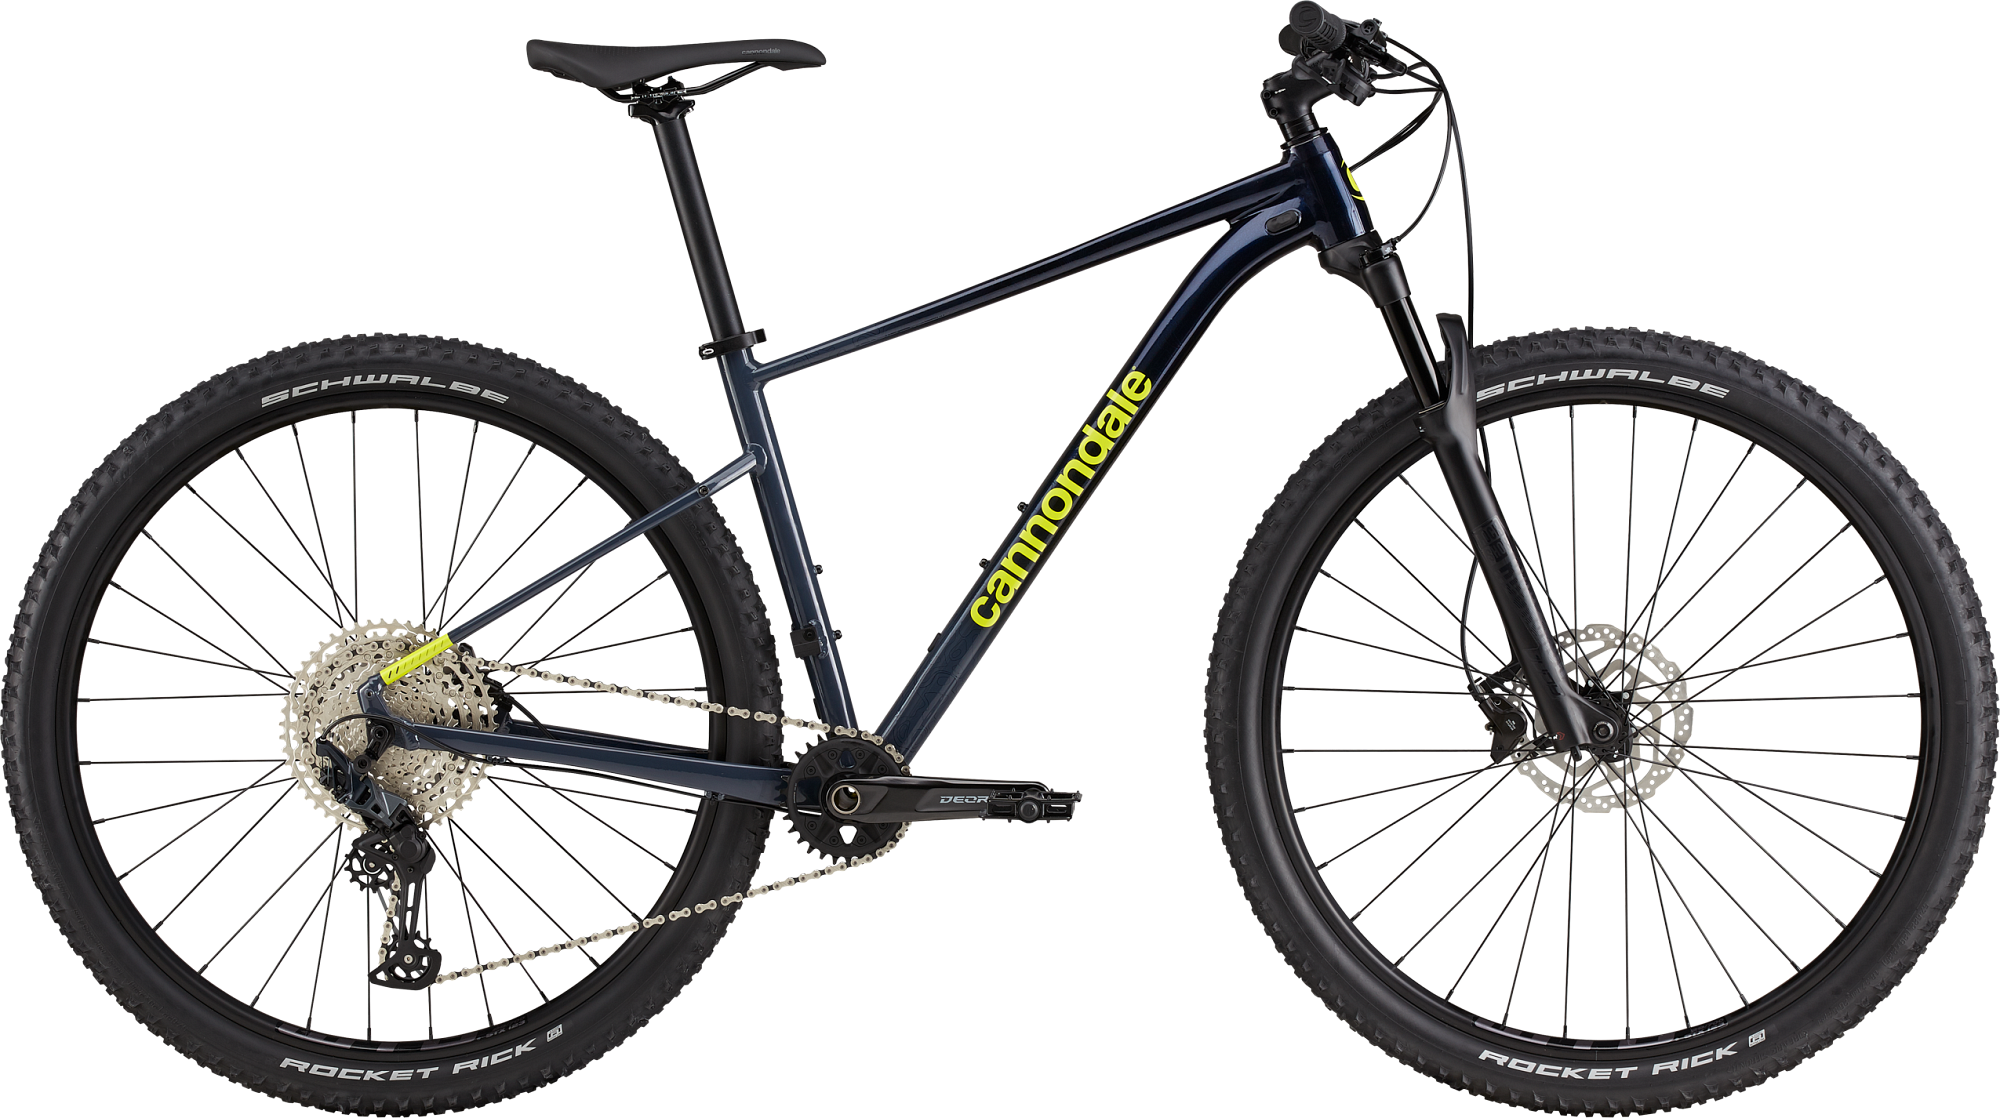 Are Cannondale Mountain Bikes Good (Are They "Worth It")?